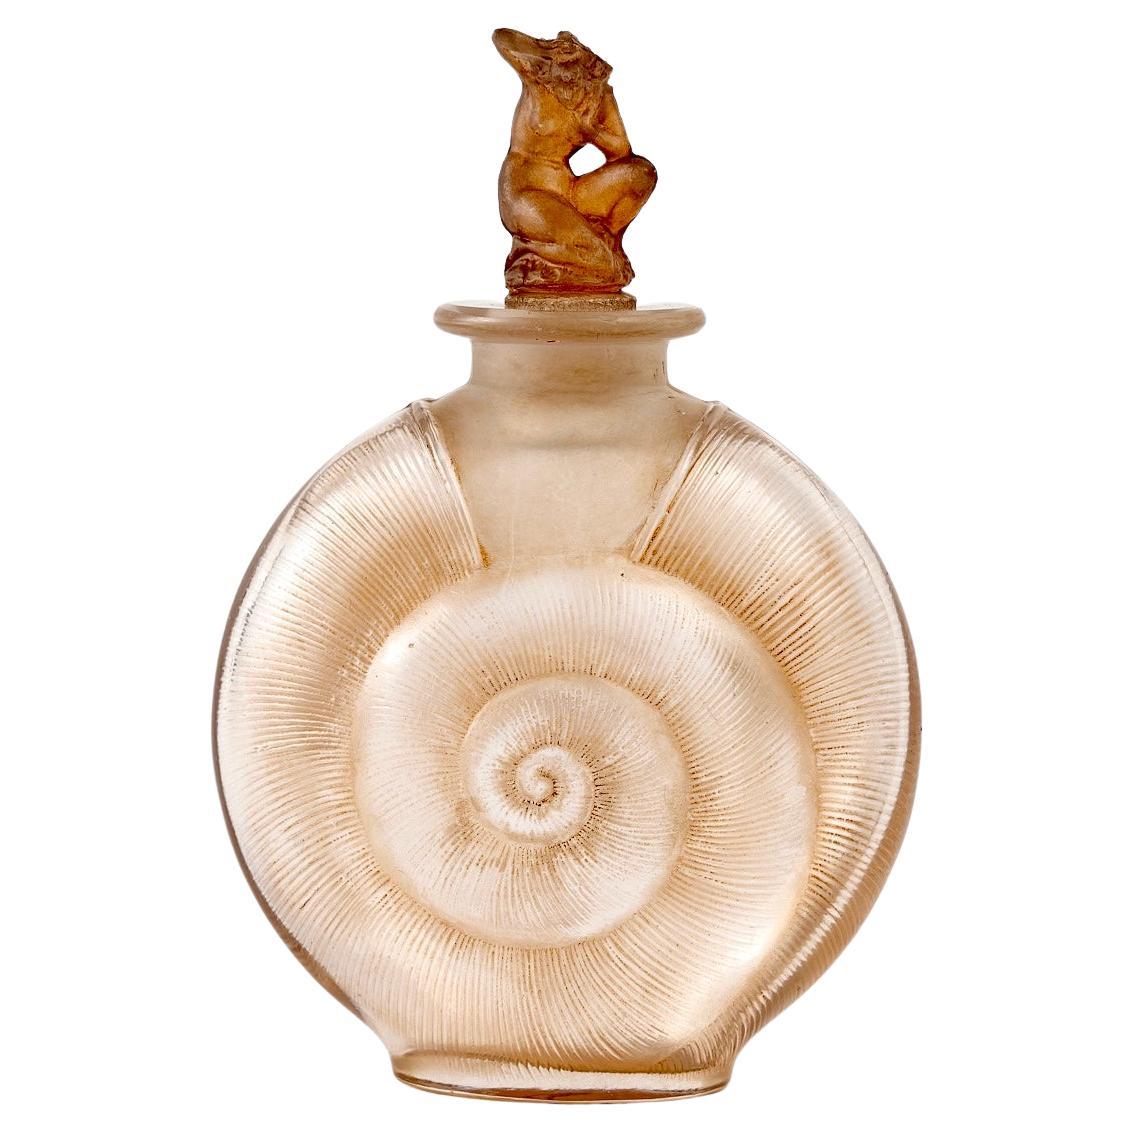 1920 René Lalique, Perfume Bottle Amphitrite Frosted Glass with Sepia Patina